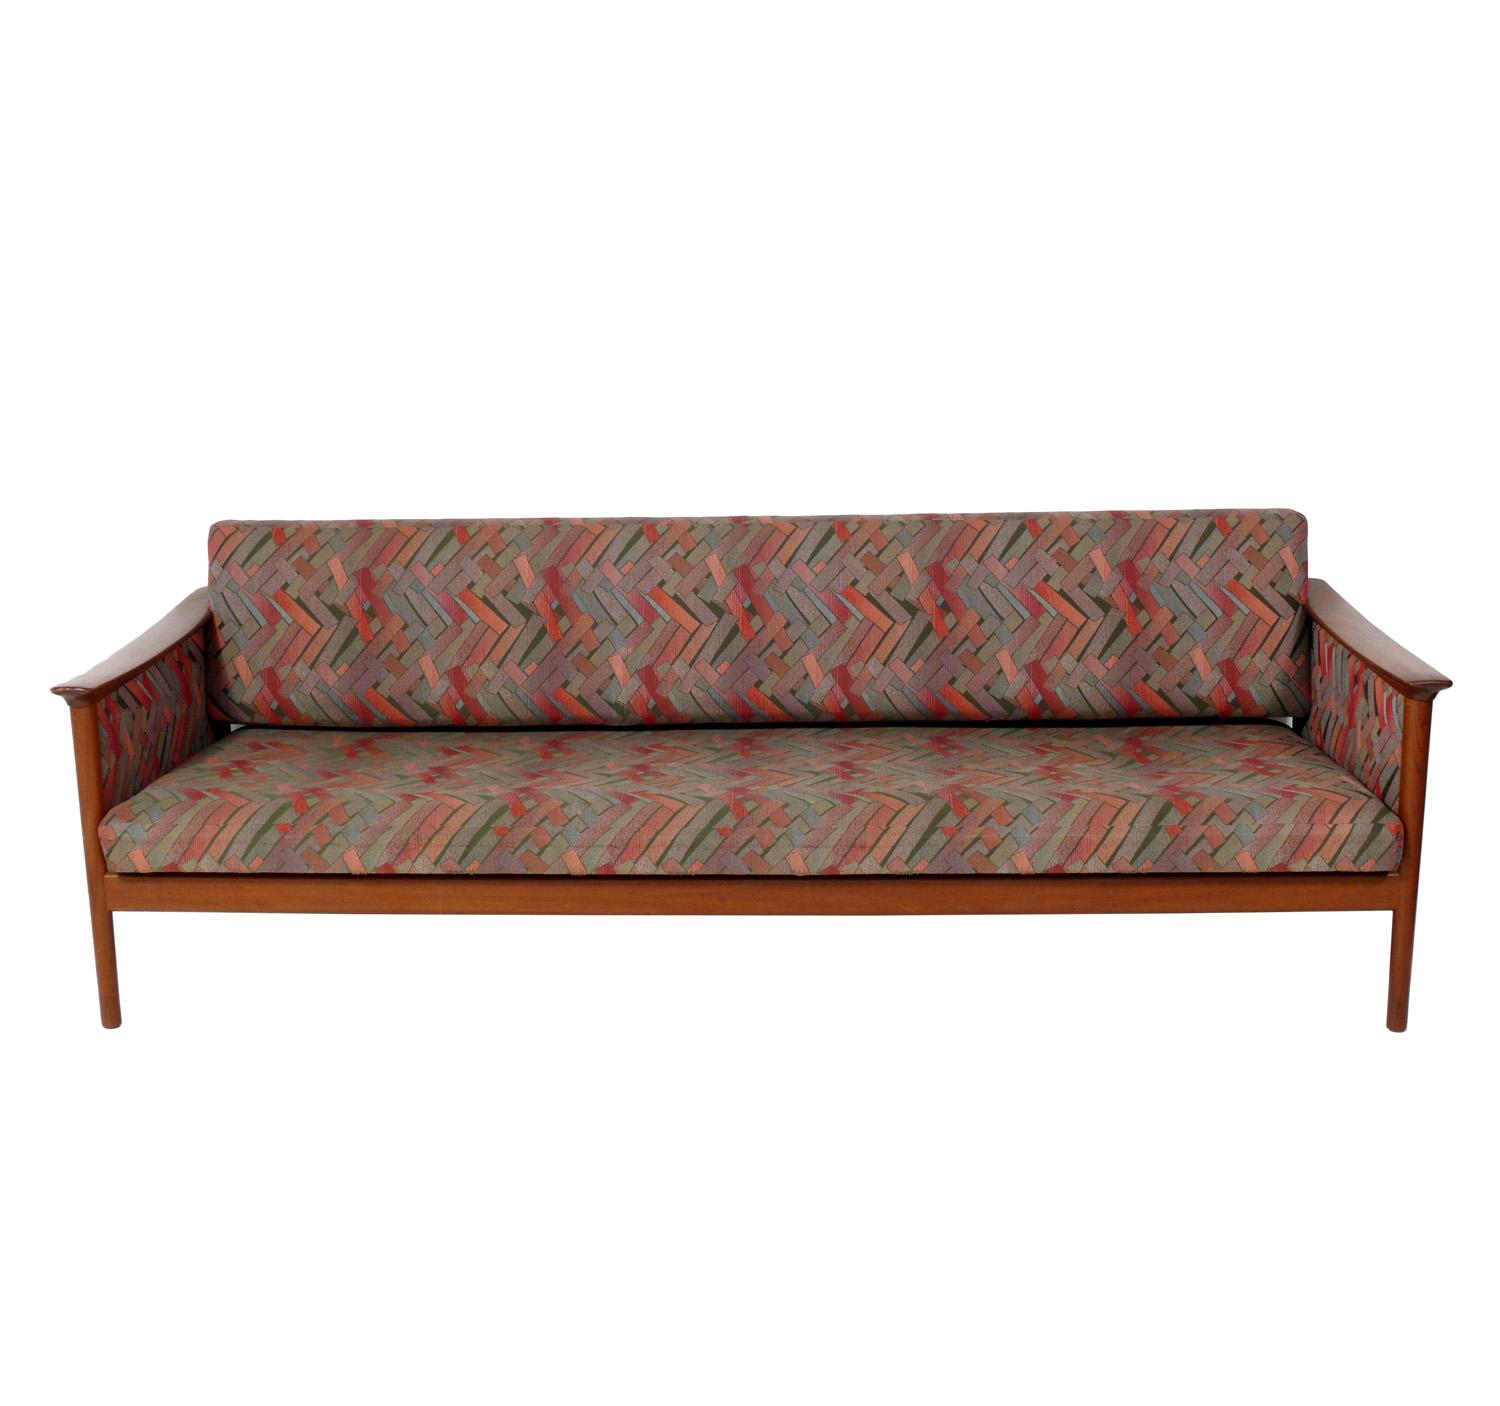 Danish modern teak sofa, Denmark, circa 1960s. This sofa is currently being reupholstered and can be completed in your fabric. The price noted includes reupholstery in your fabric. Simply send us 16 yards of your fabric after purchase. The teak